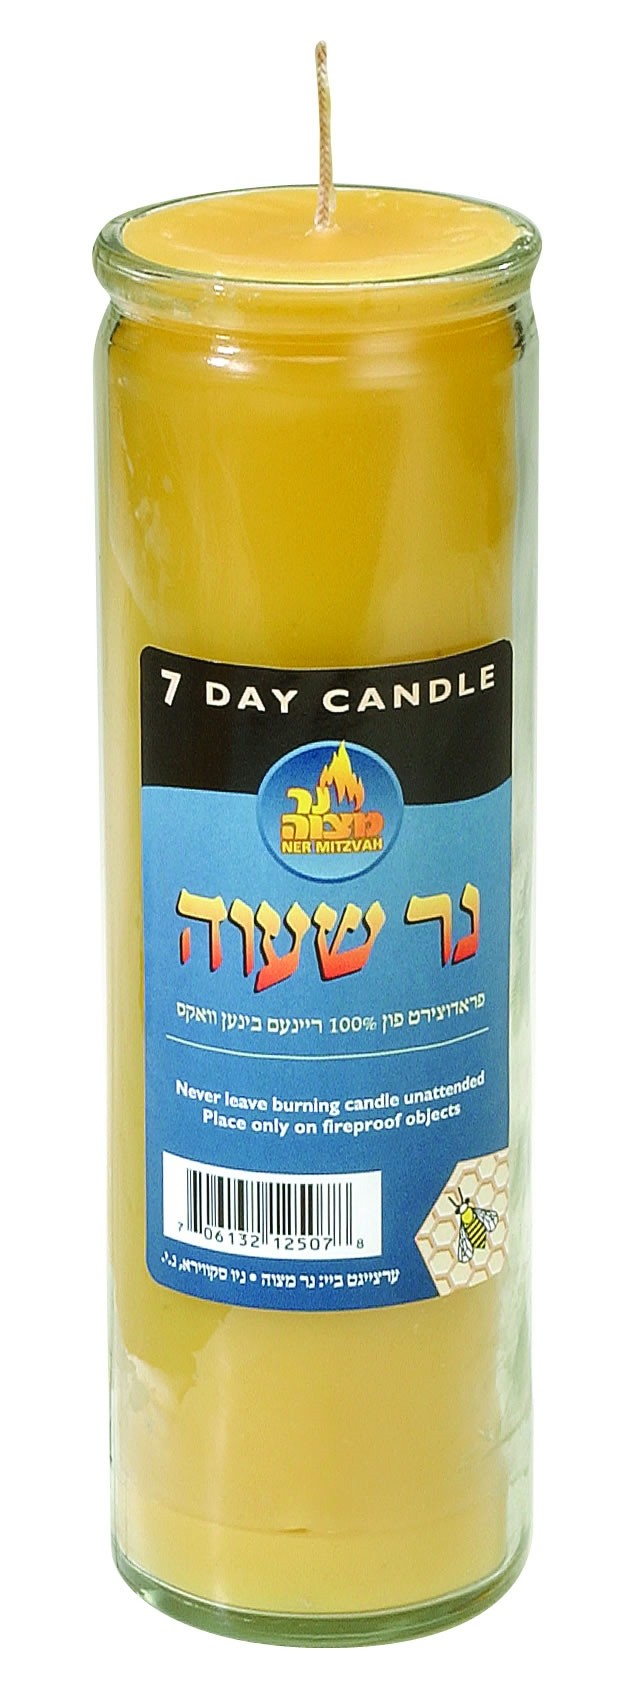 7 Day Memorial 100% Pure Beeswax Shiva Candle: Israel Book Shop